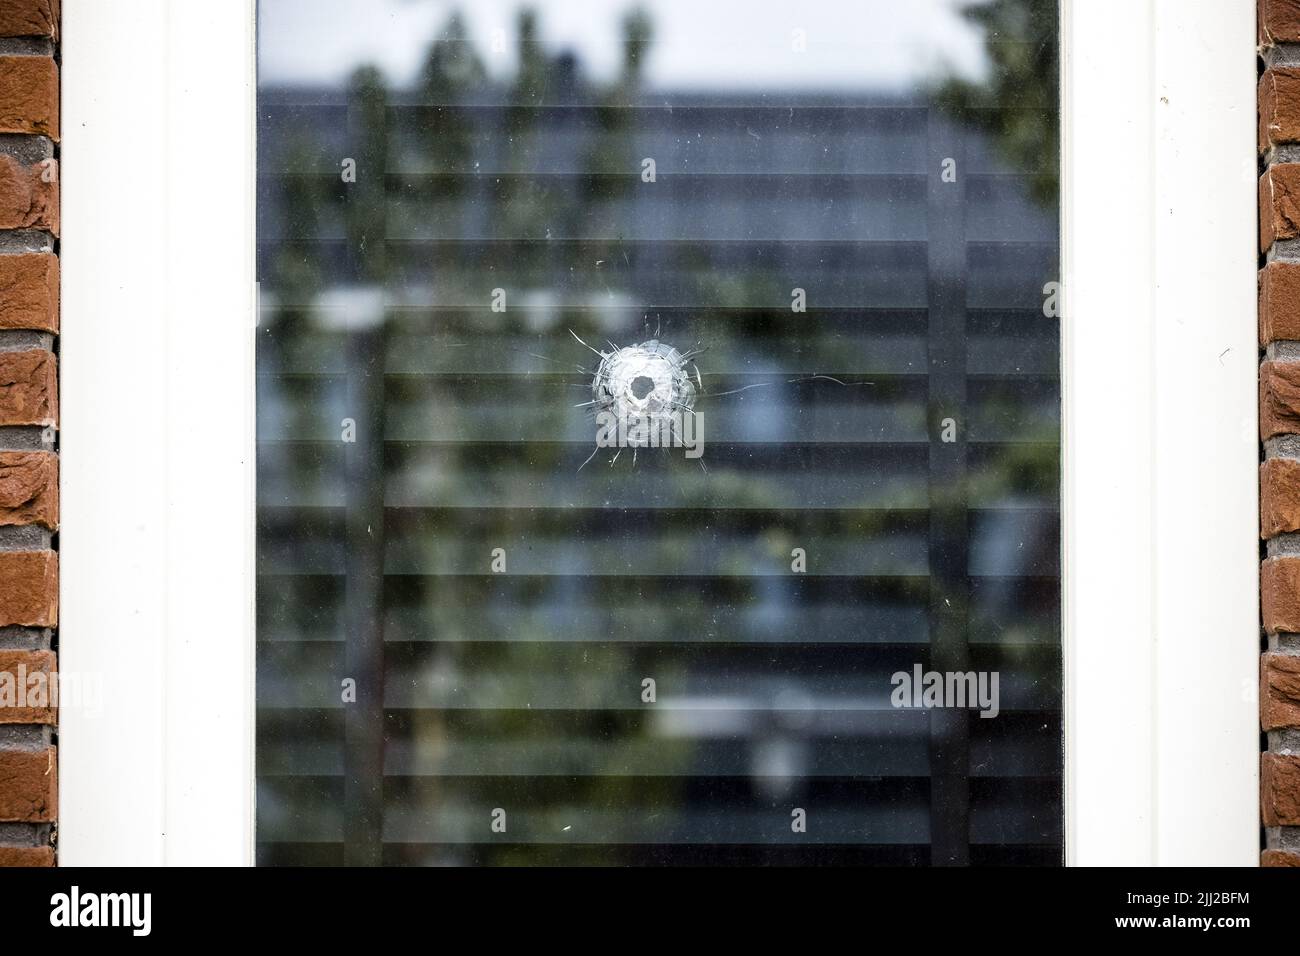 2022-07-22 17:05:31 OSS - A bullet hole in a window on the Veekraal before a shooting took place. For the fourth time in a row, a house in a residential area in Oss has been shot at. The police suspect that there is a relationship between the houses that were shot at and the people who live there. ANP ROB ENGELAAR netherlands out - belgium out Stock Photo